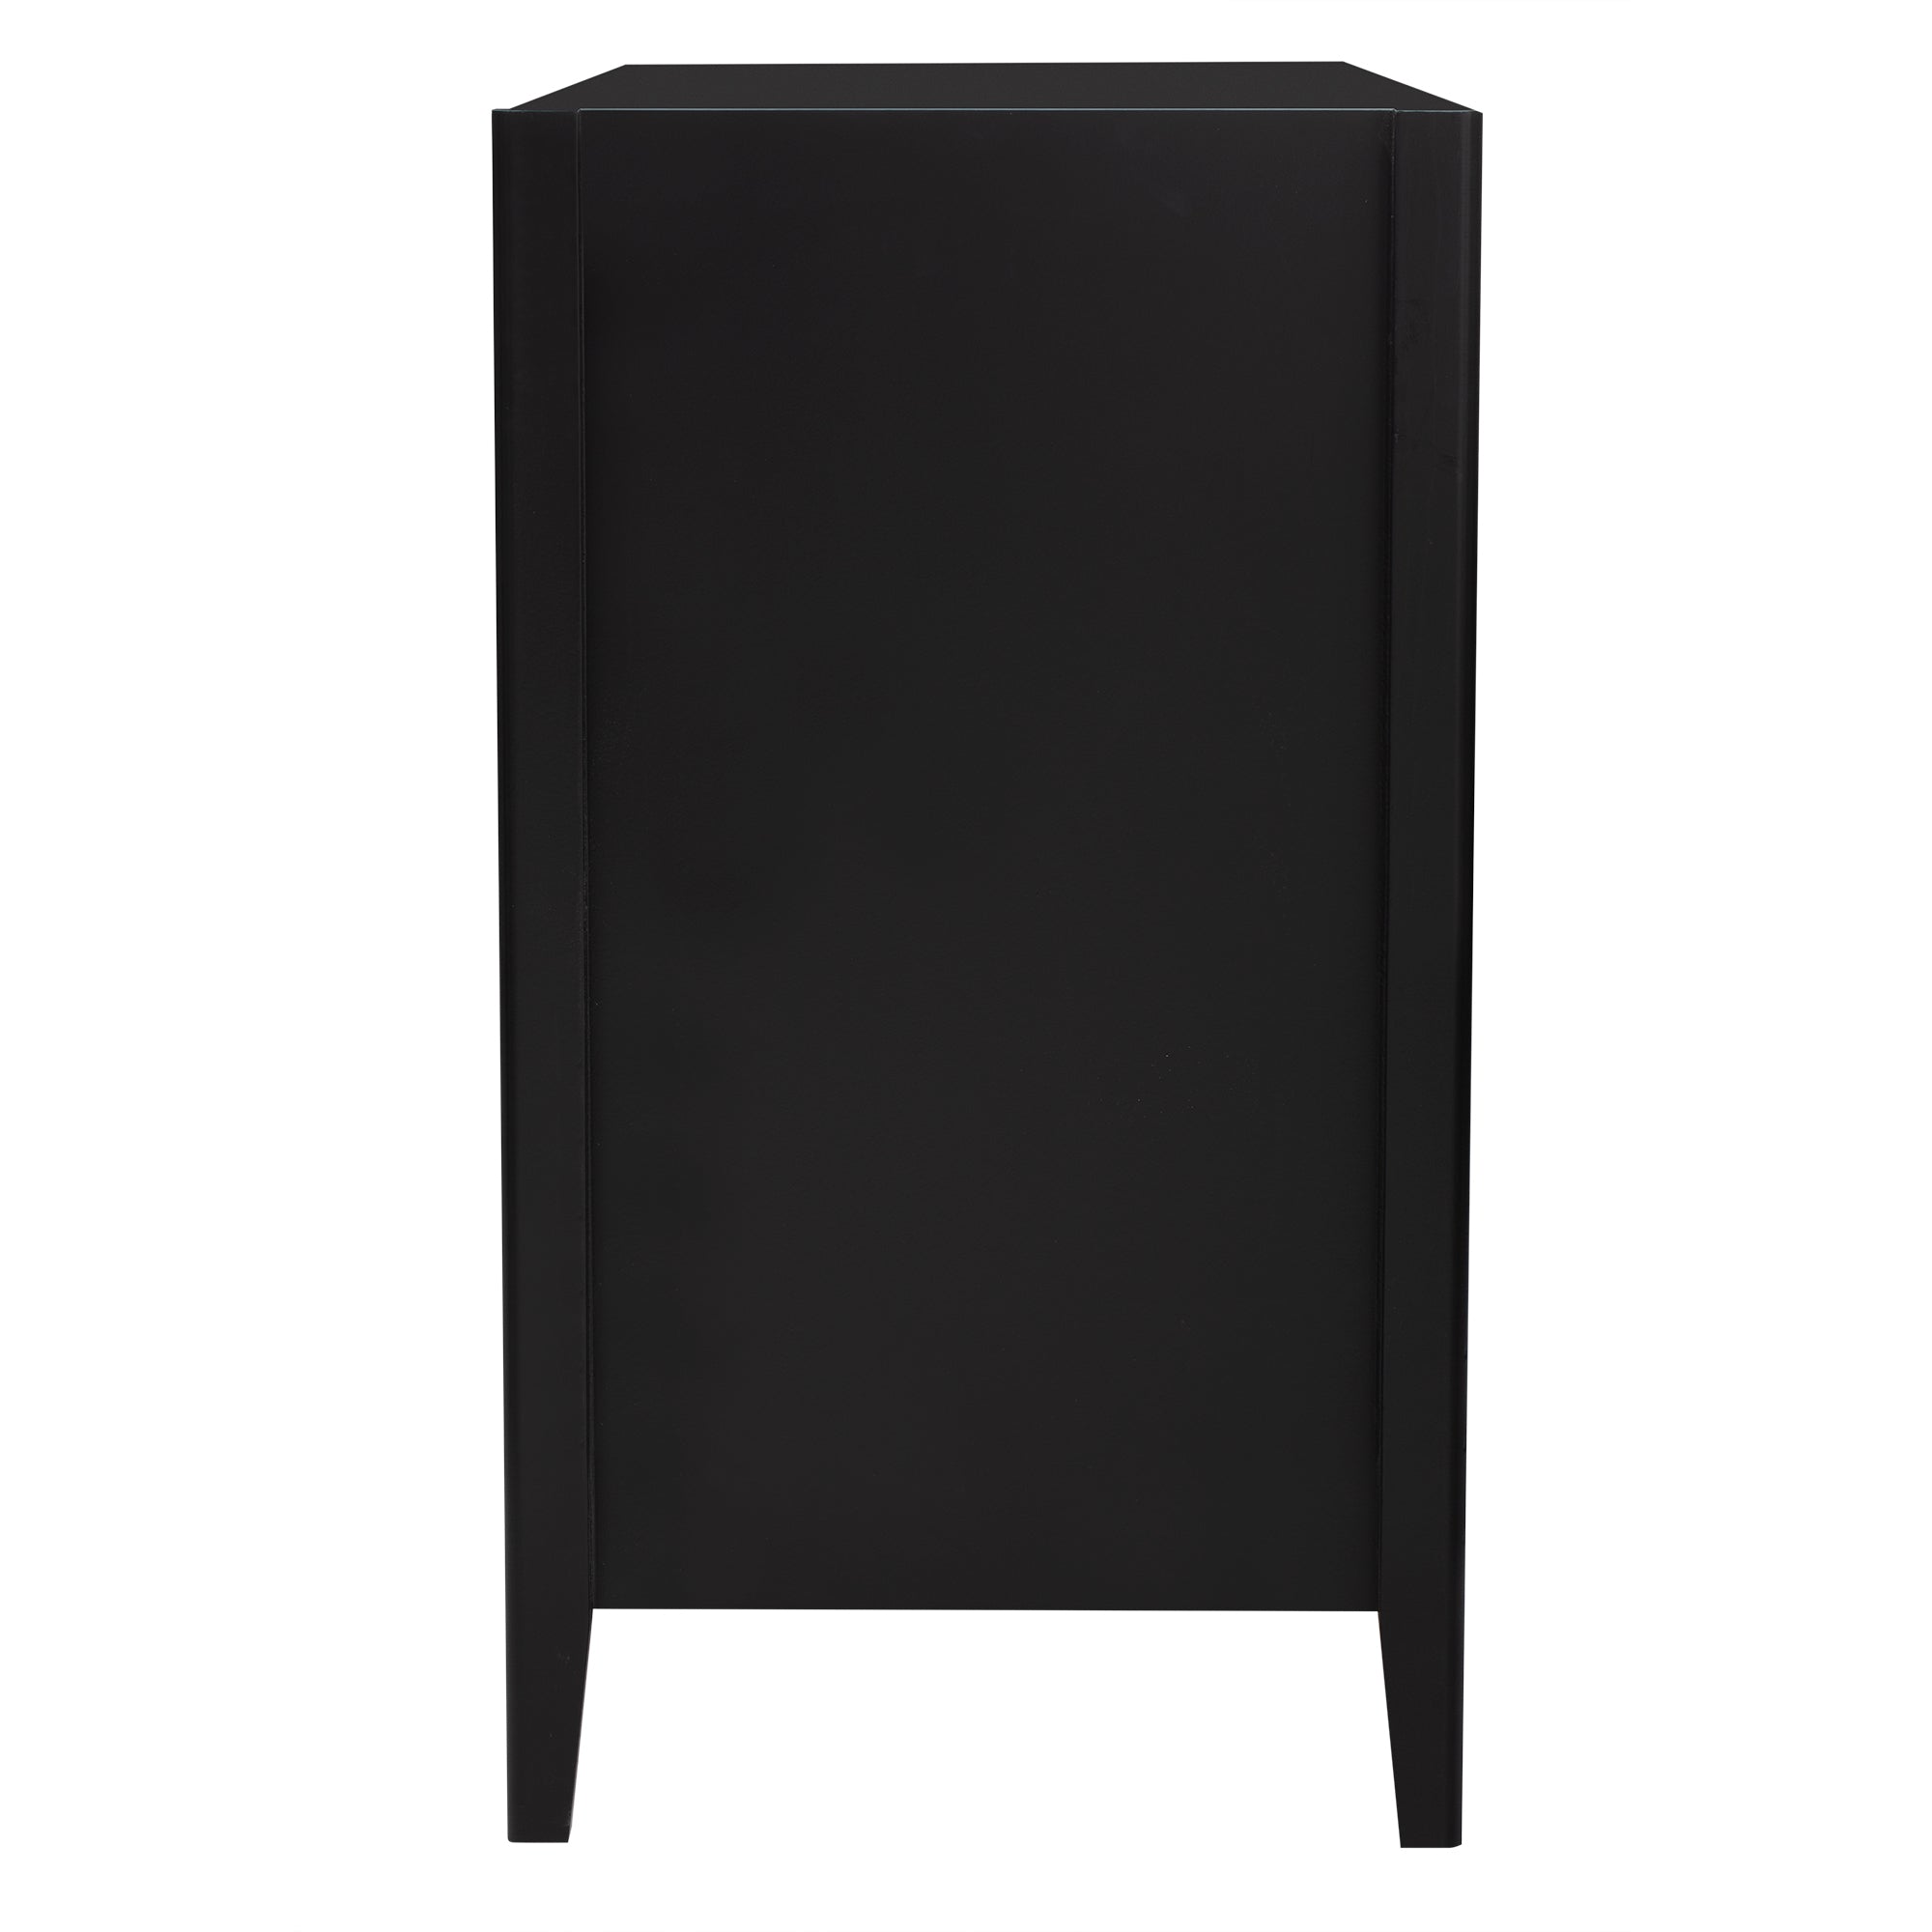 Featured Three door Storage Cabinet with Metal 1-2 shelves-black-primary living space-shelves